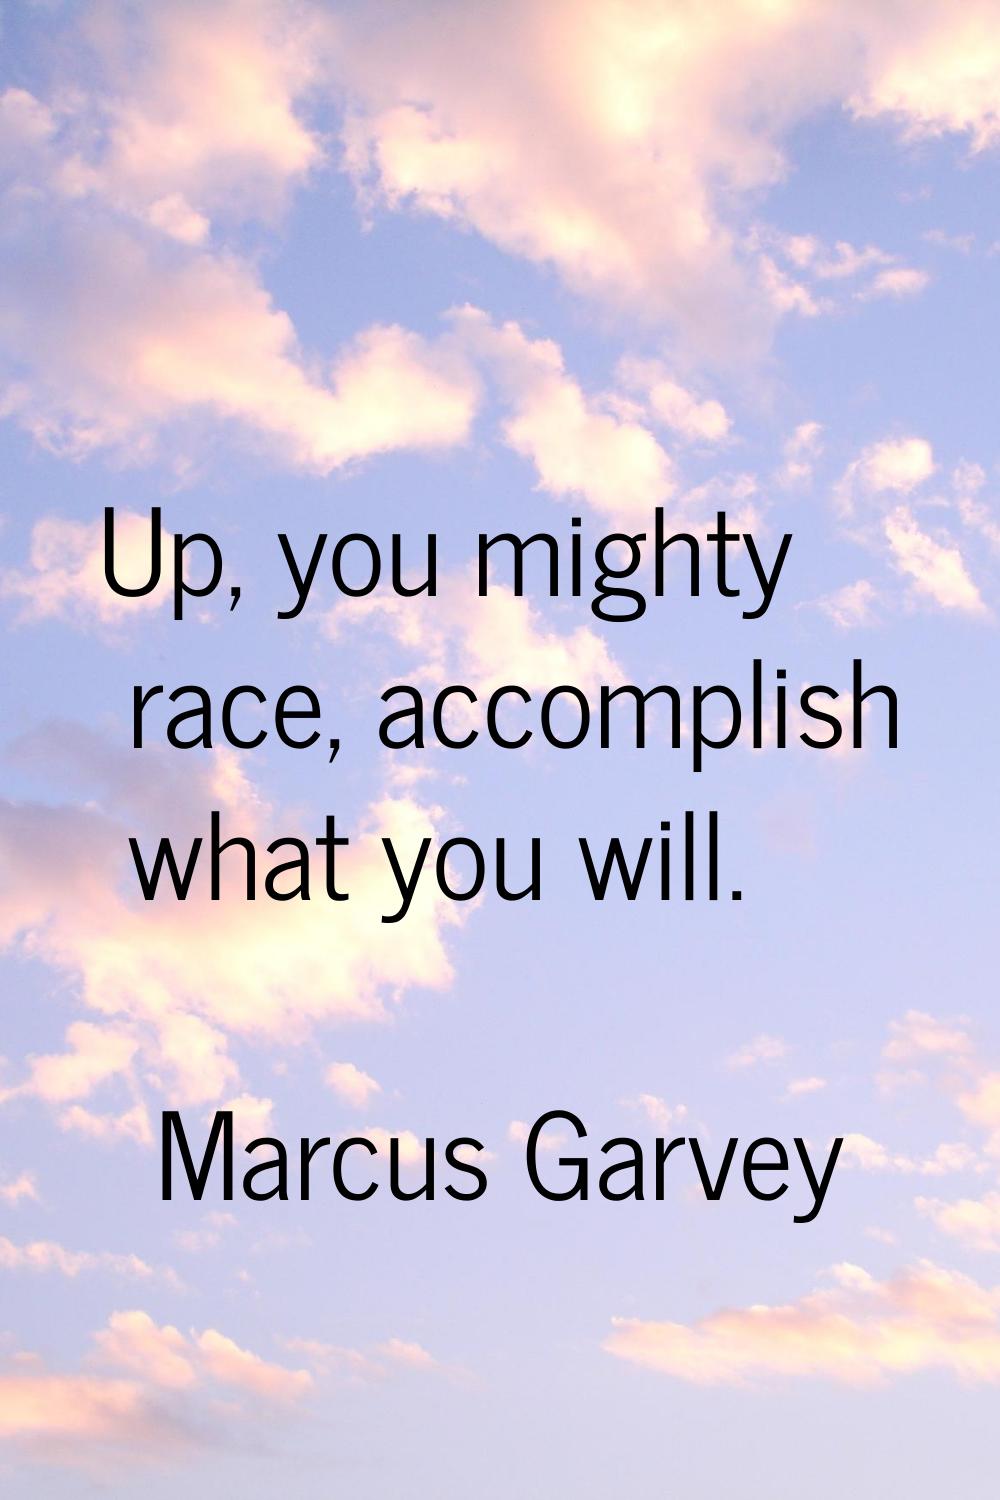 Up, you mighty race, accomplish what you will.